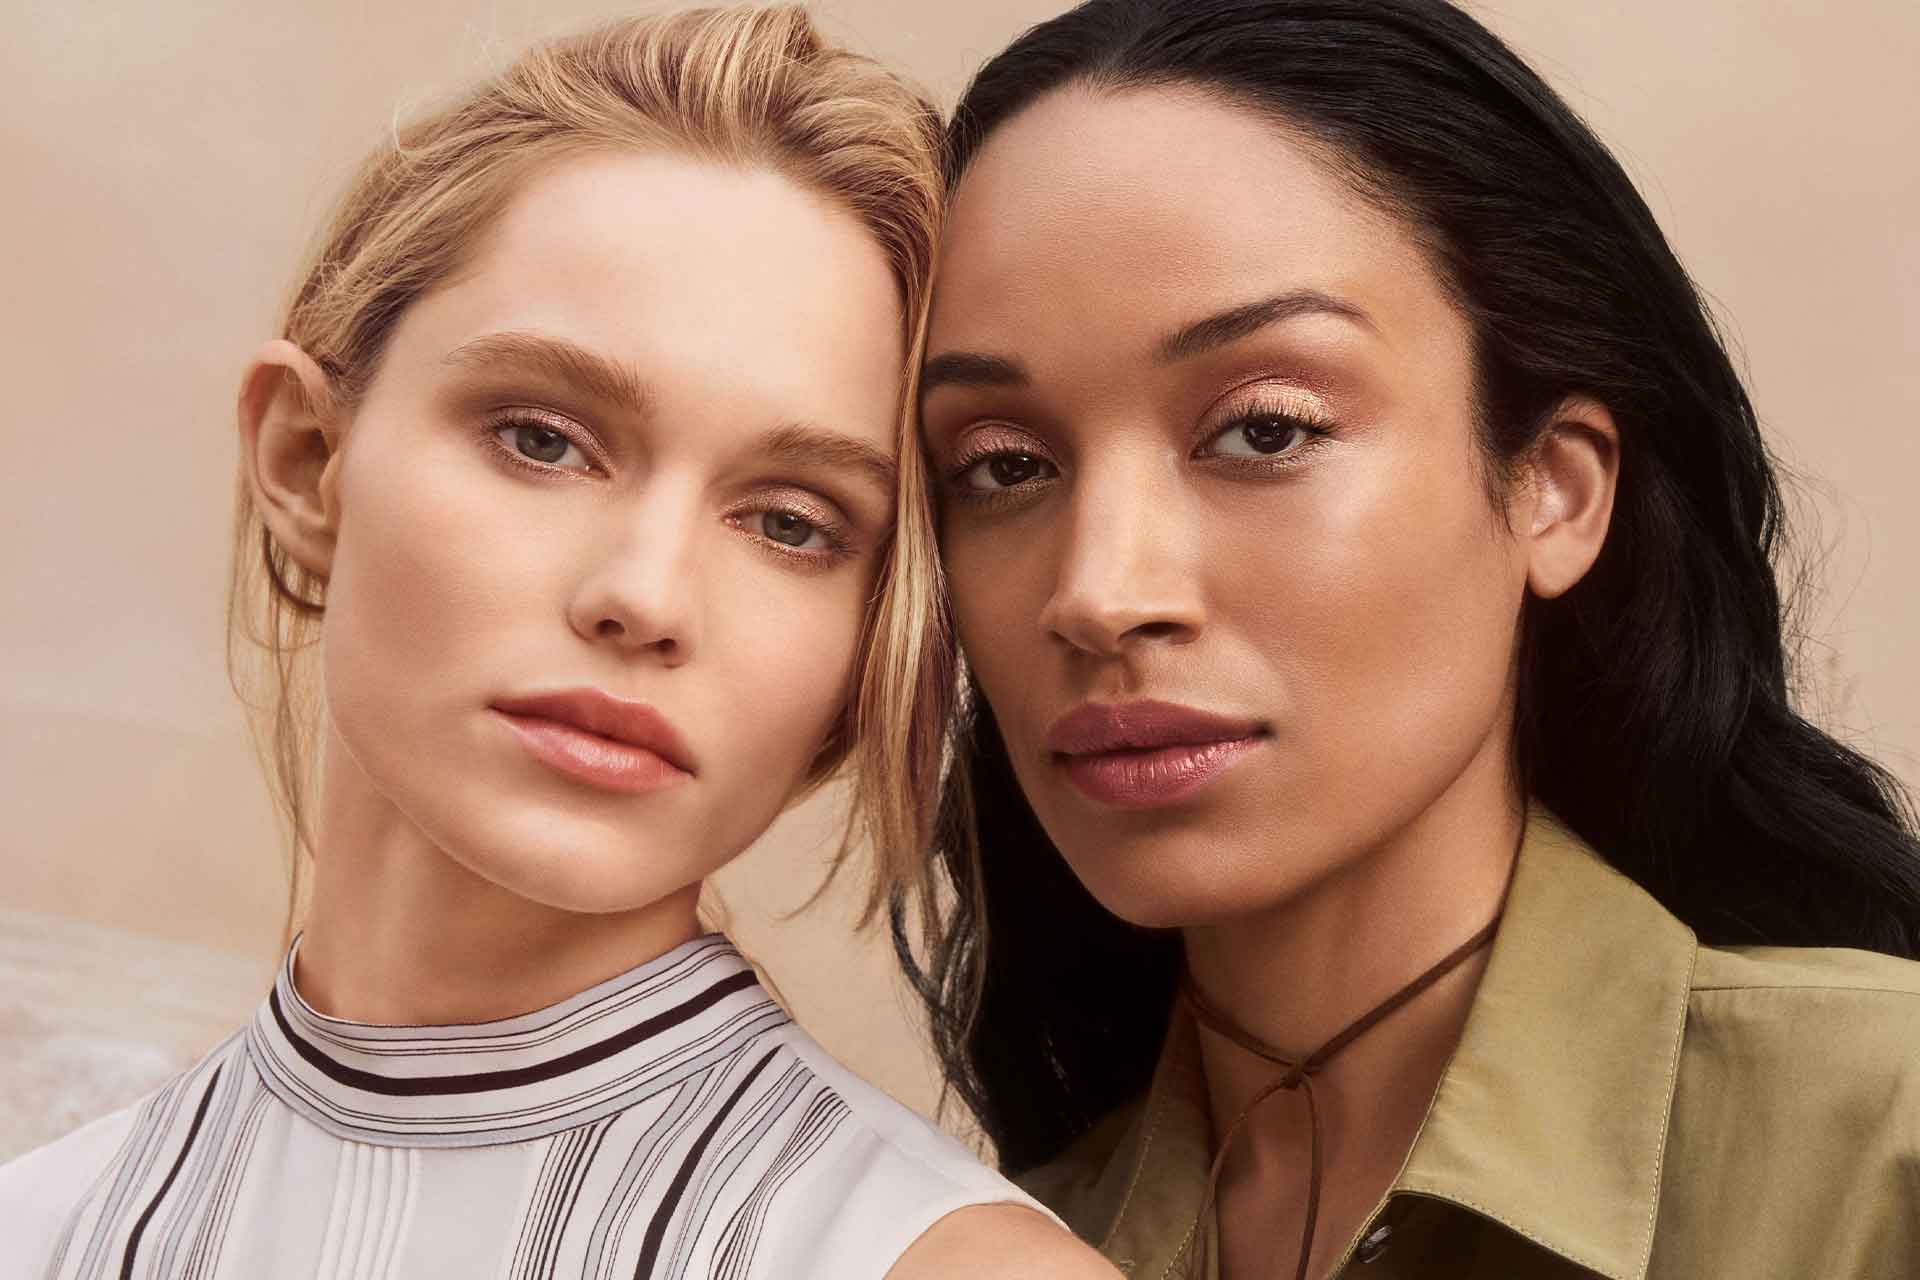 Two models with flawless skin for Chantecaille beauty campaign